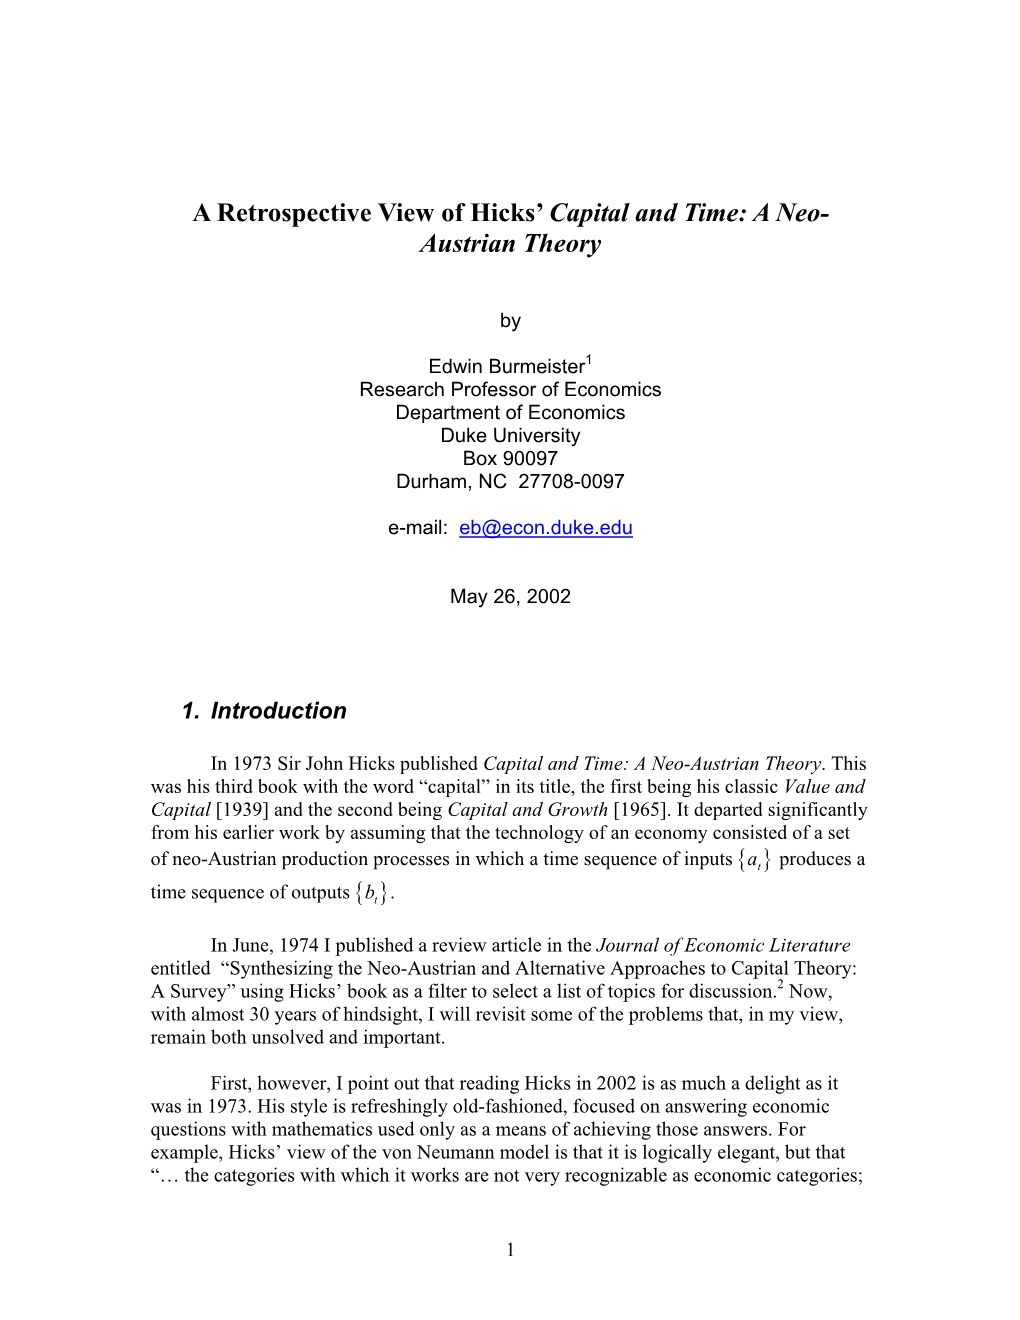 A Retrospective View of Hicks' Capital and Time: a Neo-Austrian Theory